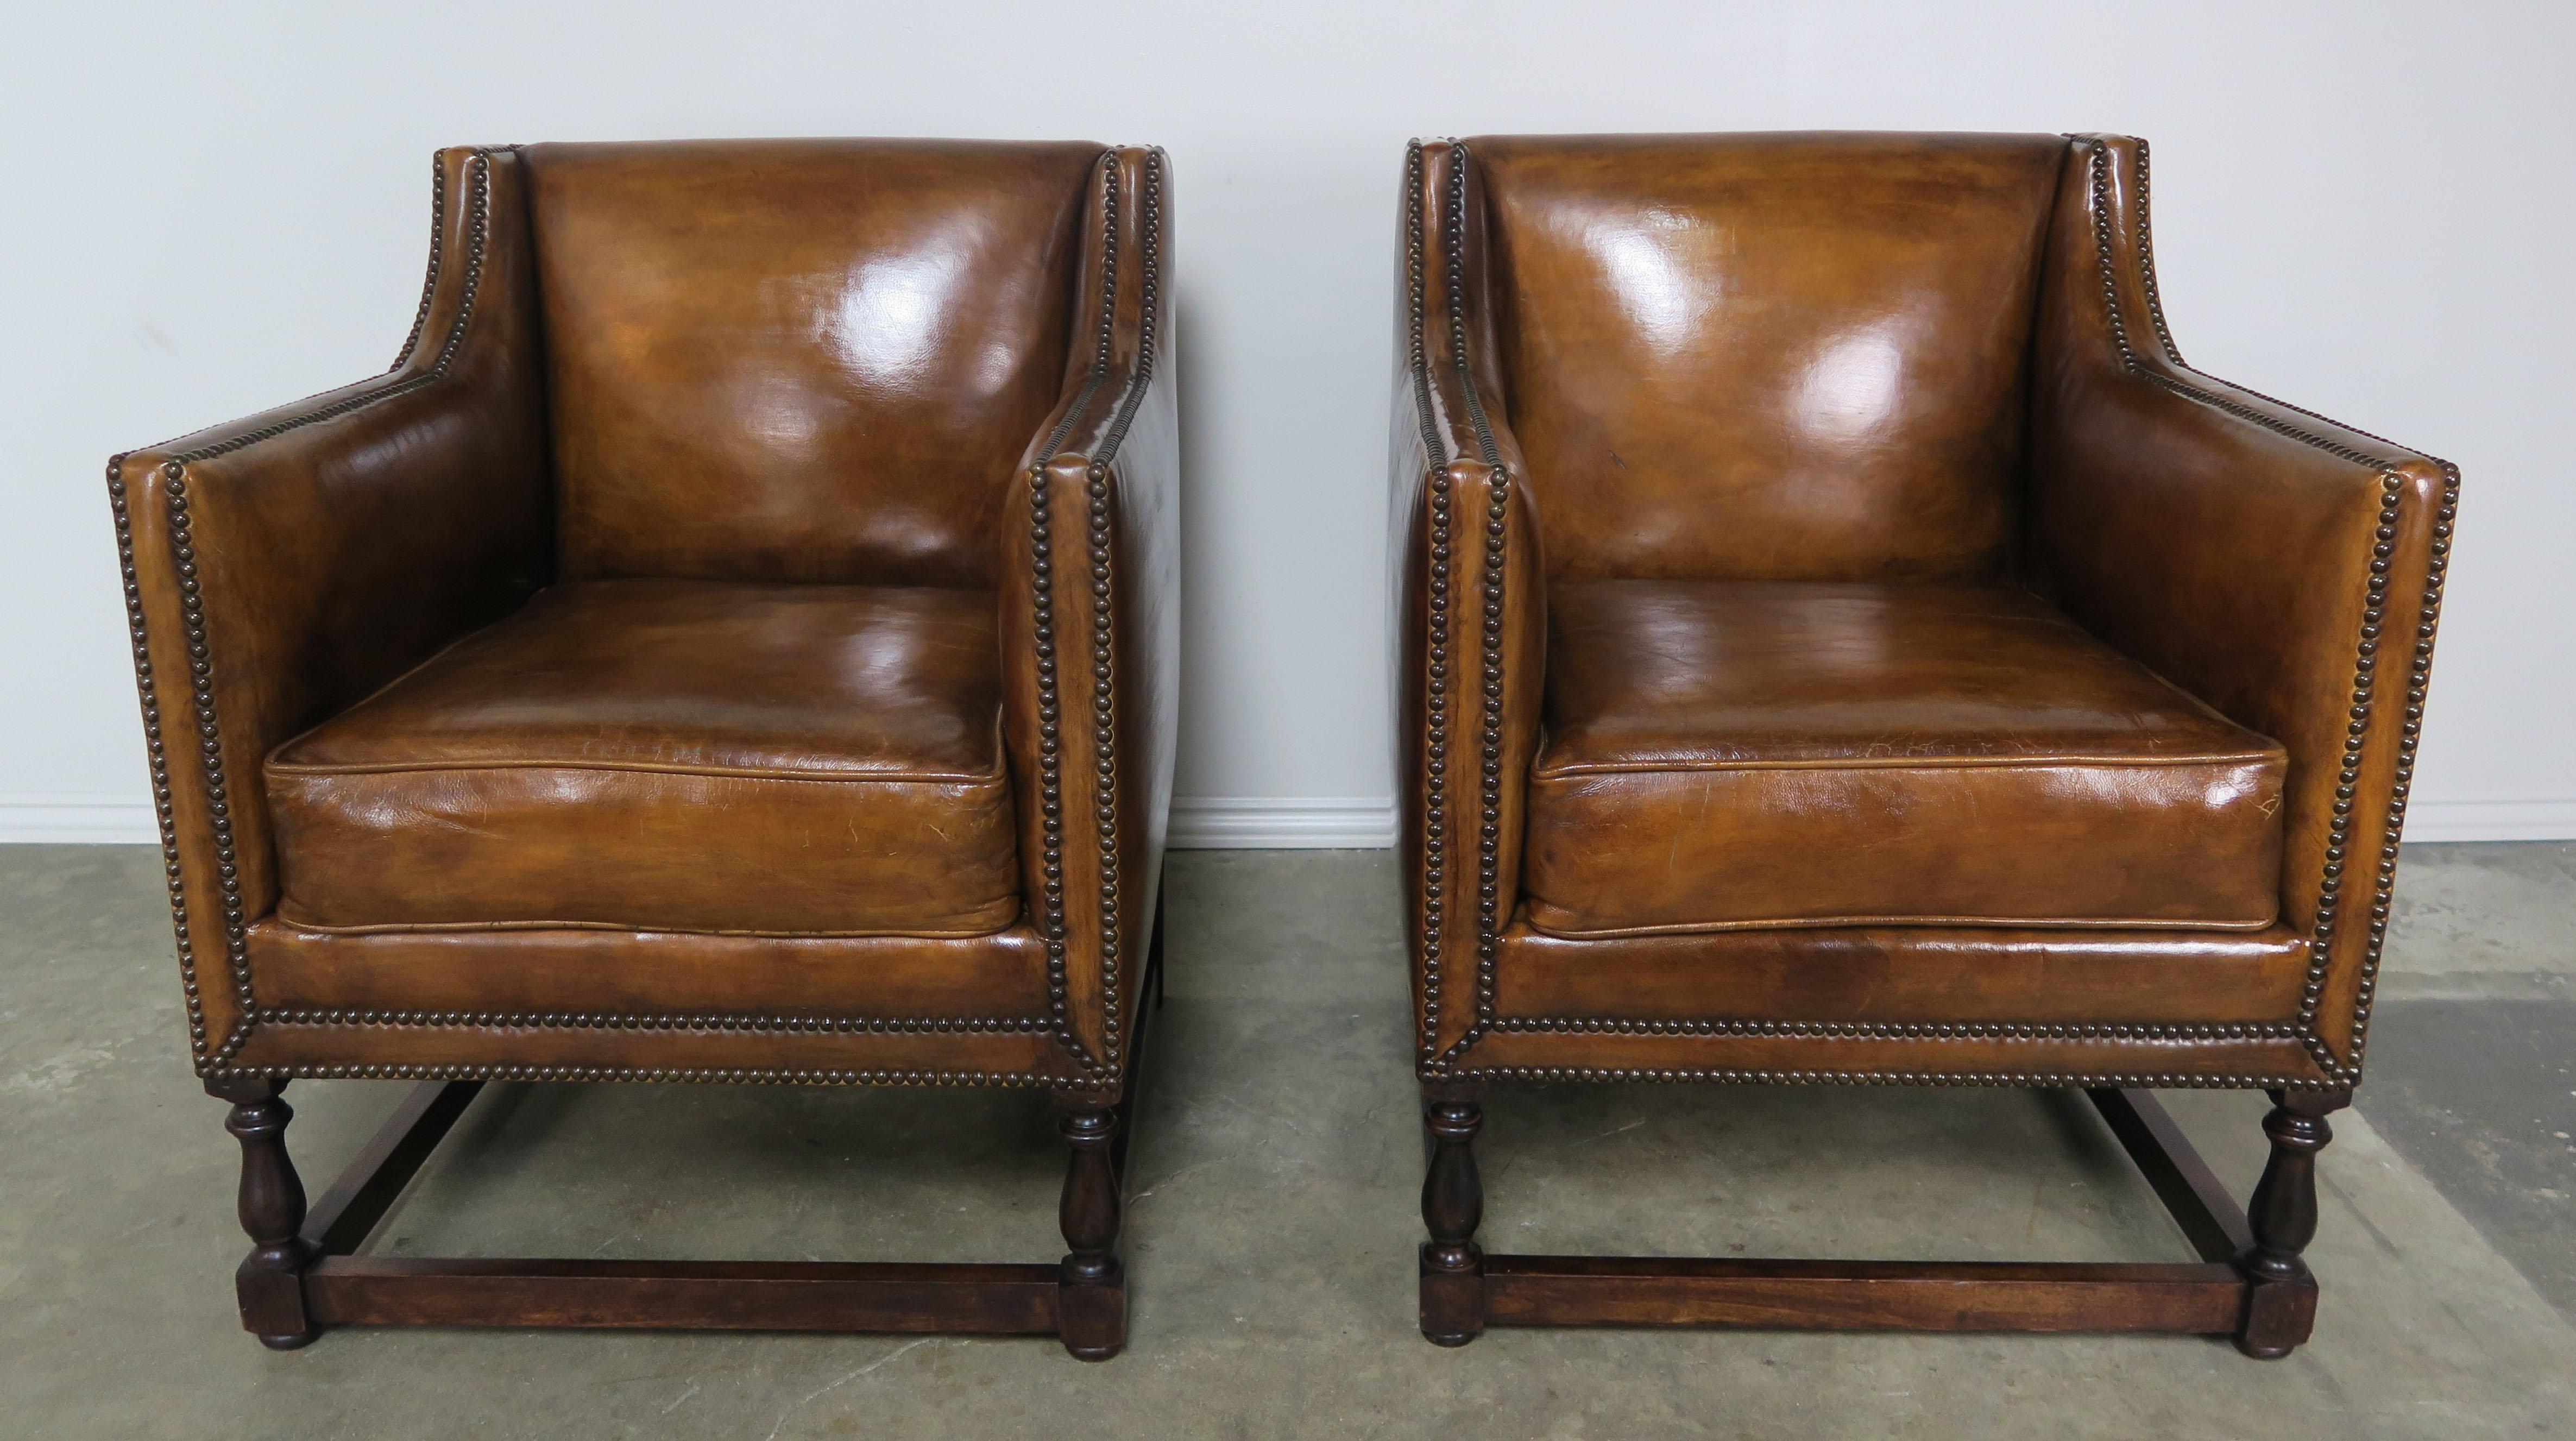 Pair of custom leather upholstered armchairs made by Melissa Levinson antiques. The walnut finished simple frame is upholstered in a beautiful worn looking distressed leather and finished with antique brass nailhead trim detail. We can make this